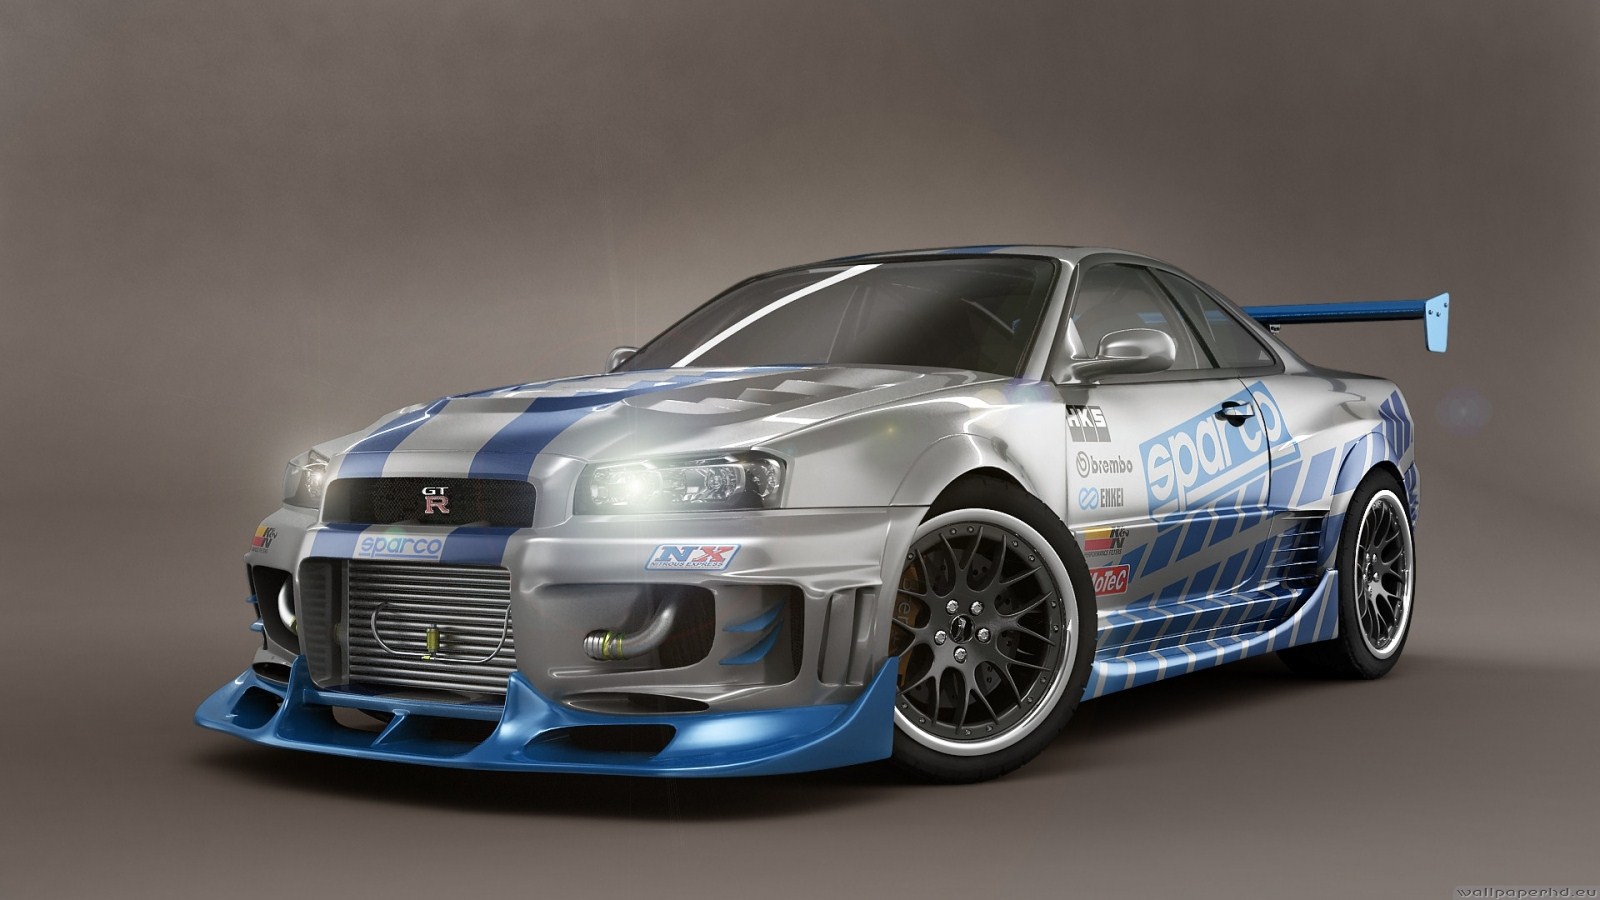 Are Watching New Uping Nissan Skyline Gtr Pictures Car Cool